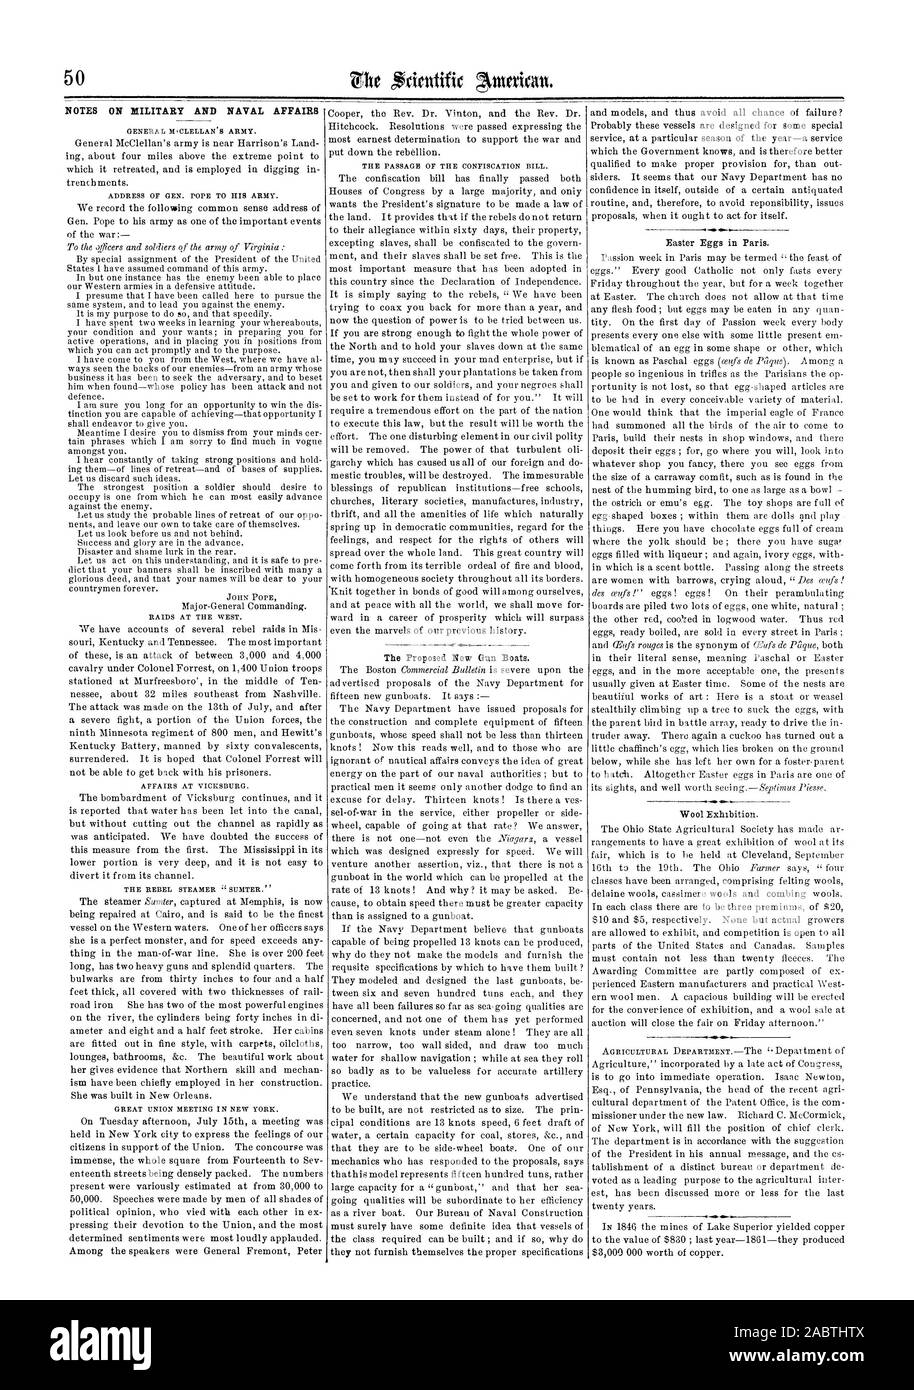 NOTES ON MILITARY AND NAVAL AFFAIRS, scientific american, 1862-07-26 Stock Photo